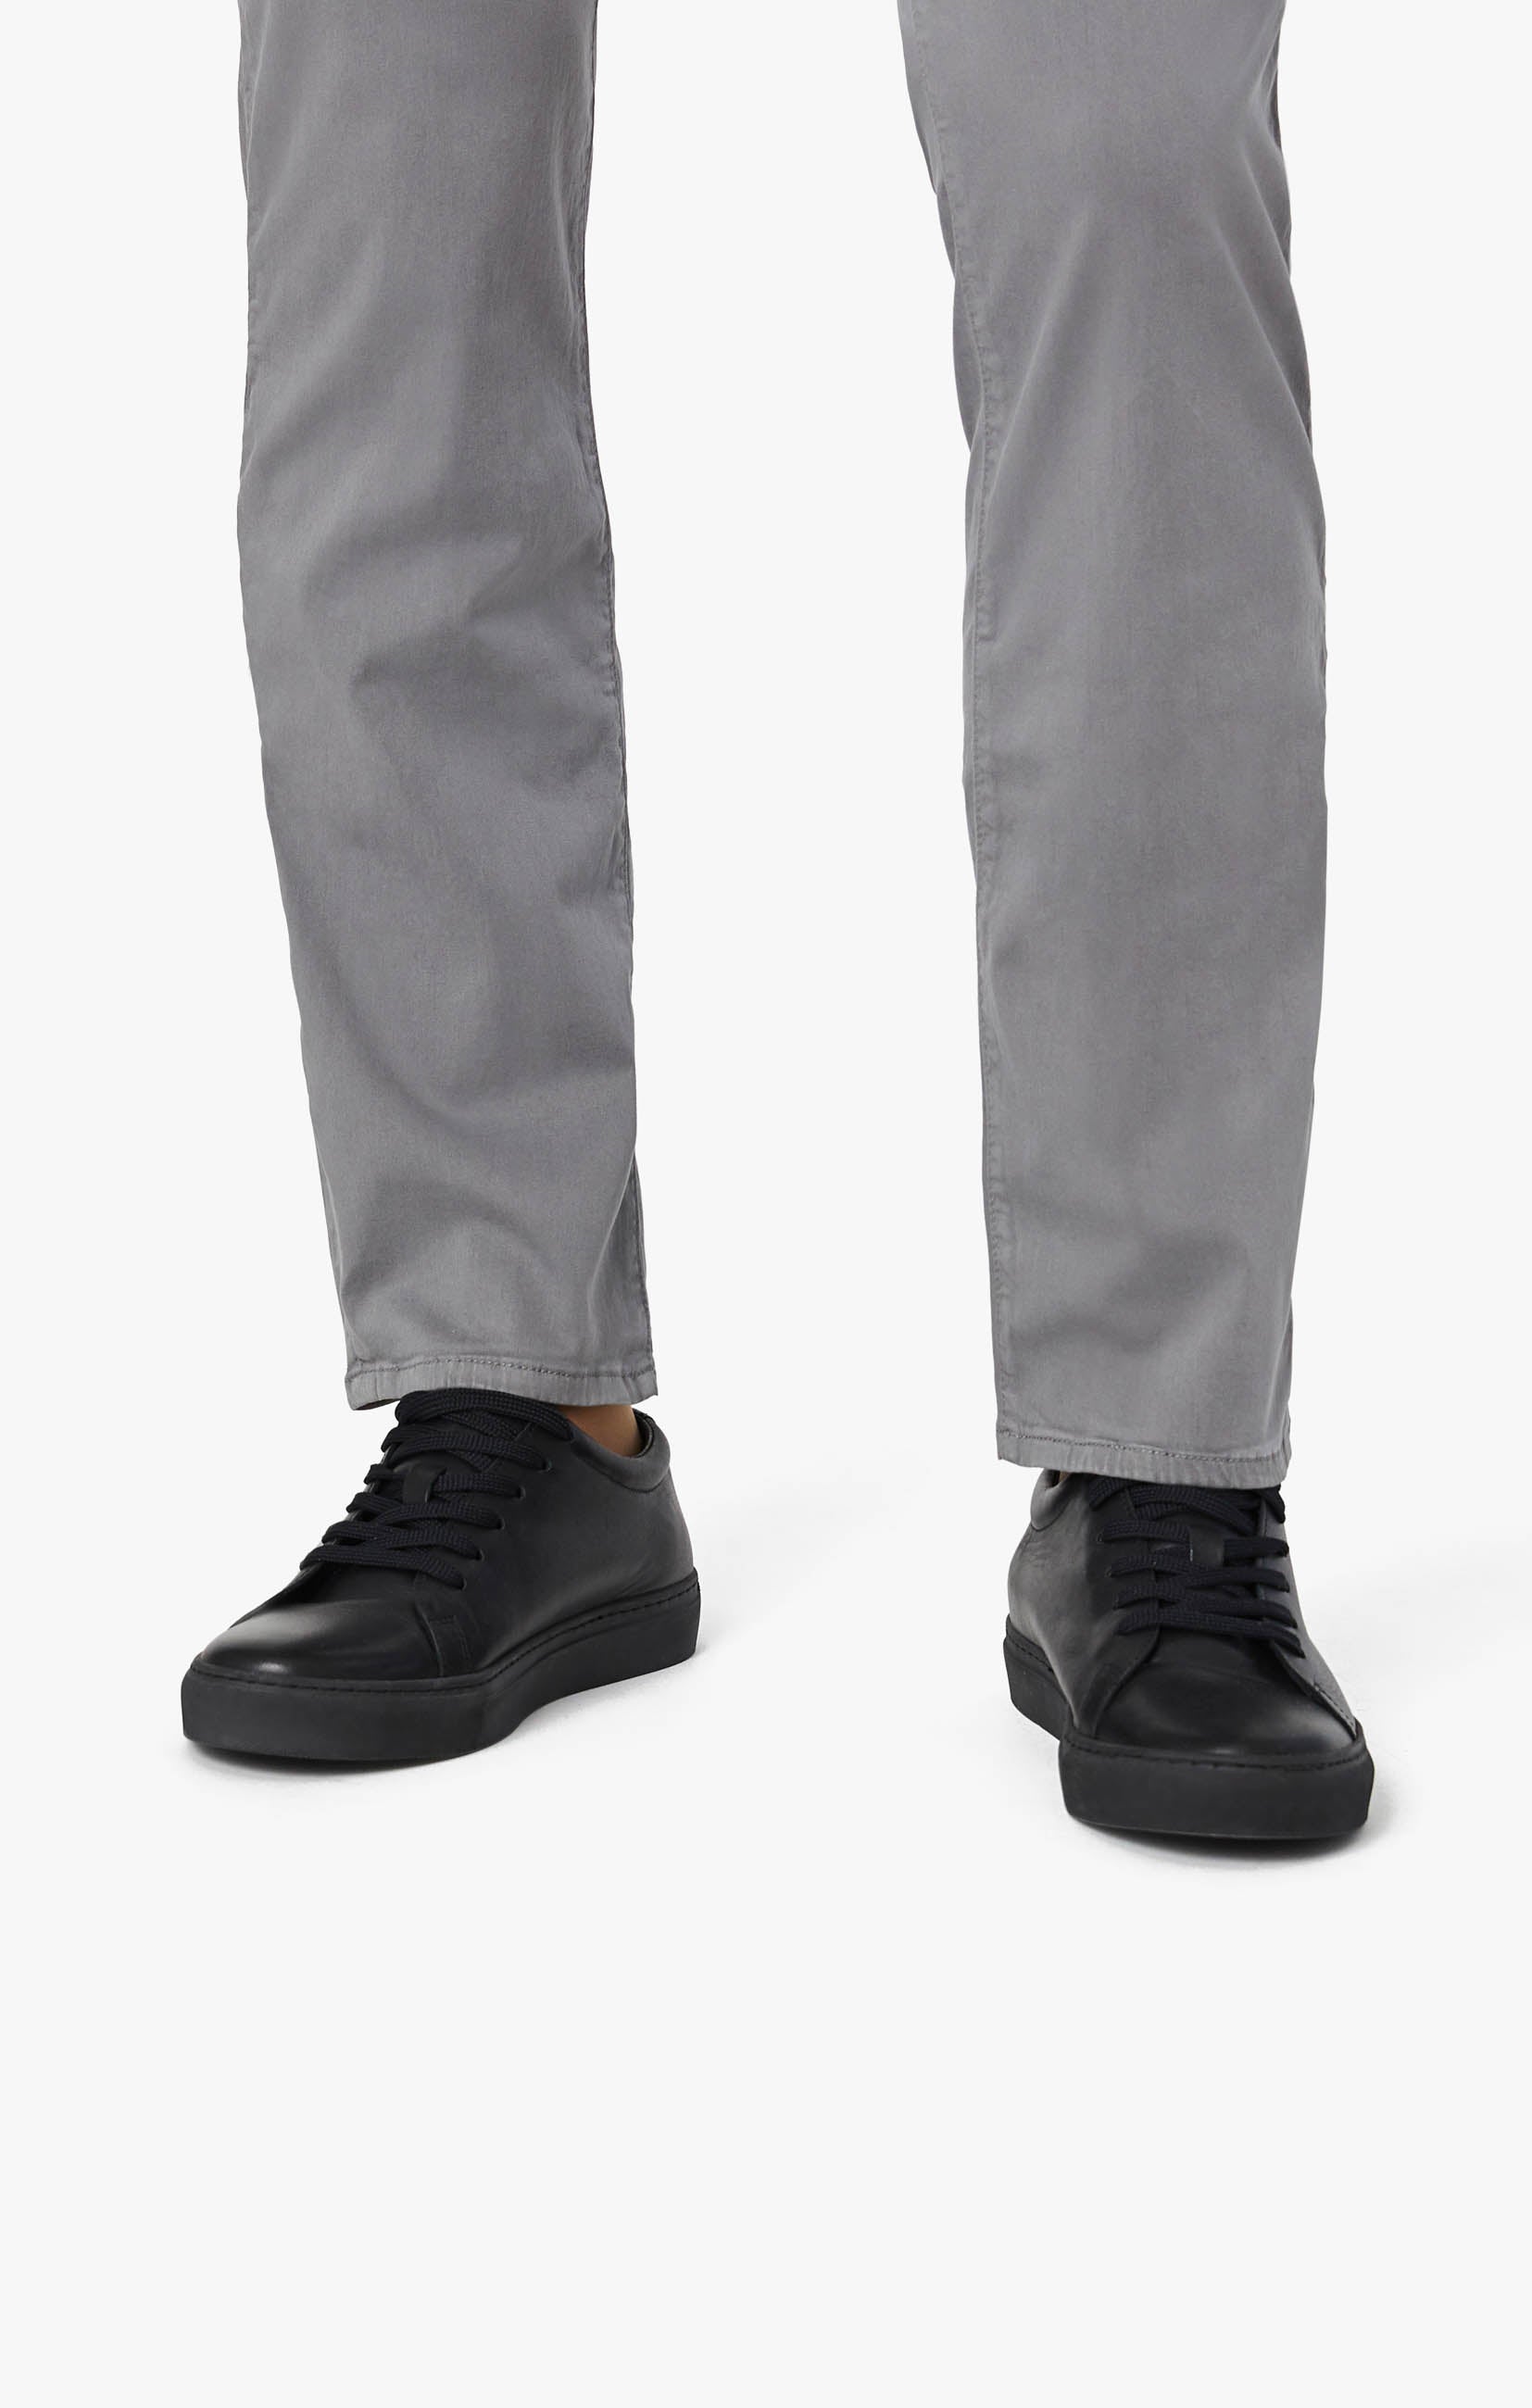 Courage Straight Leg Pants in Shark Twill Image 6